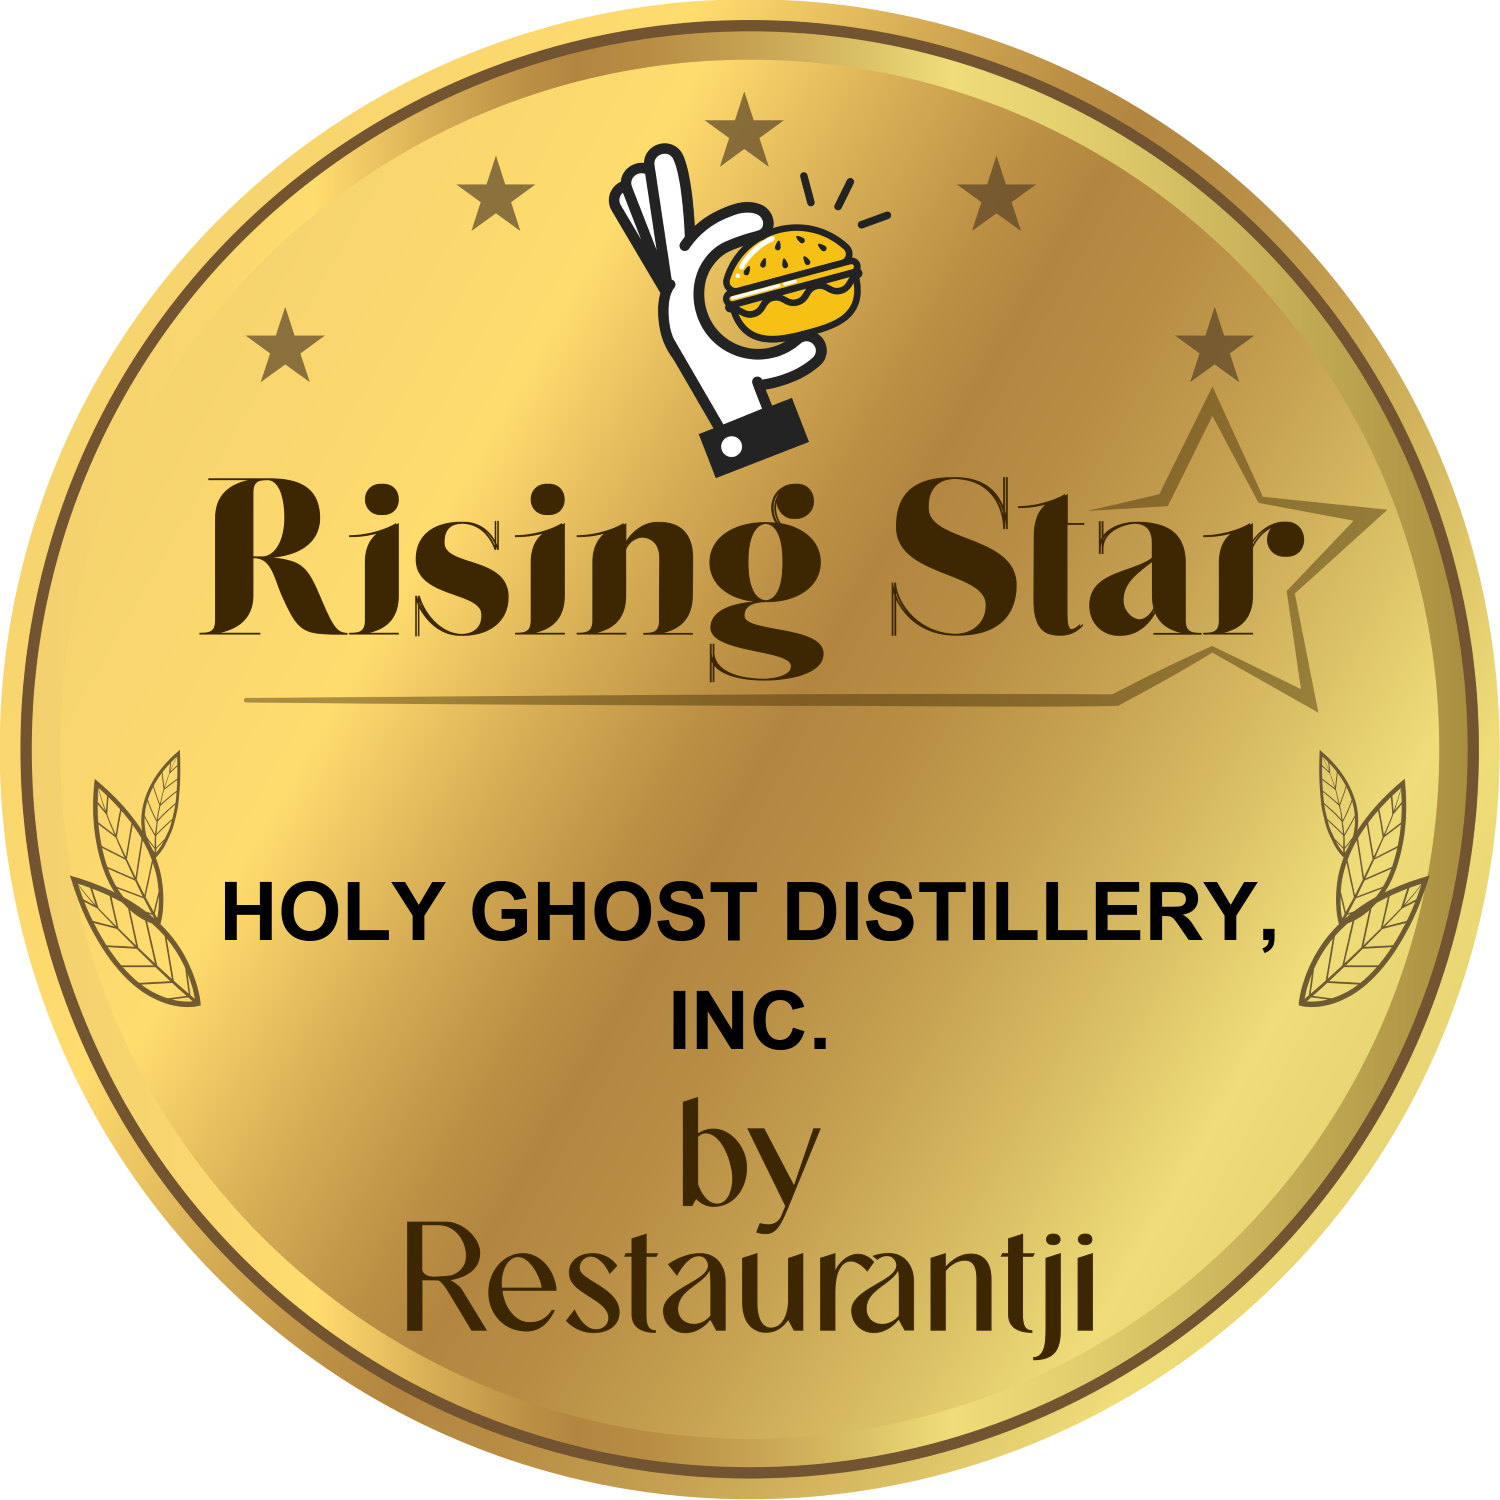 Holy Ghost Distillery, Inc. has earned accolades from Restaurantji - a user-friendly platform for discovering the finest local restaurants.